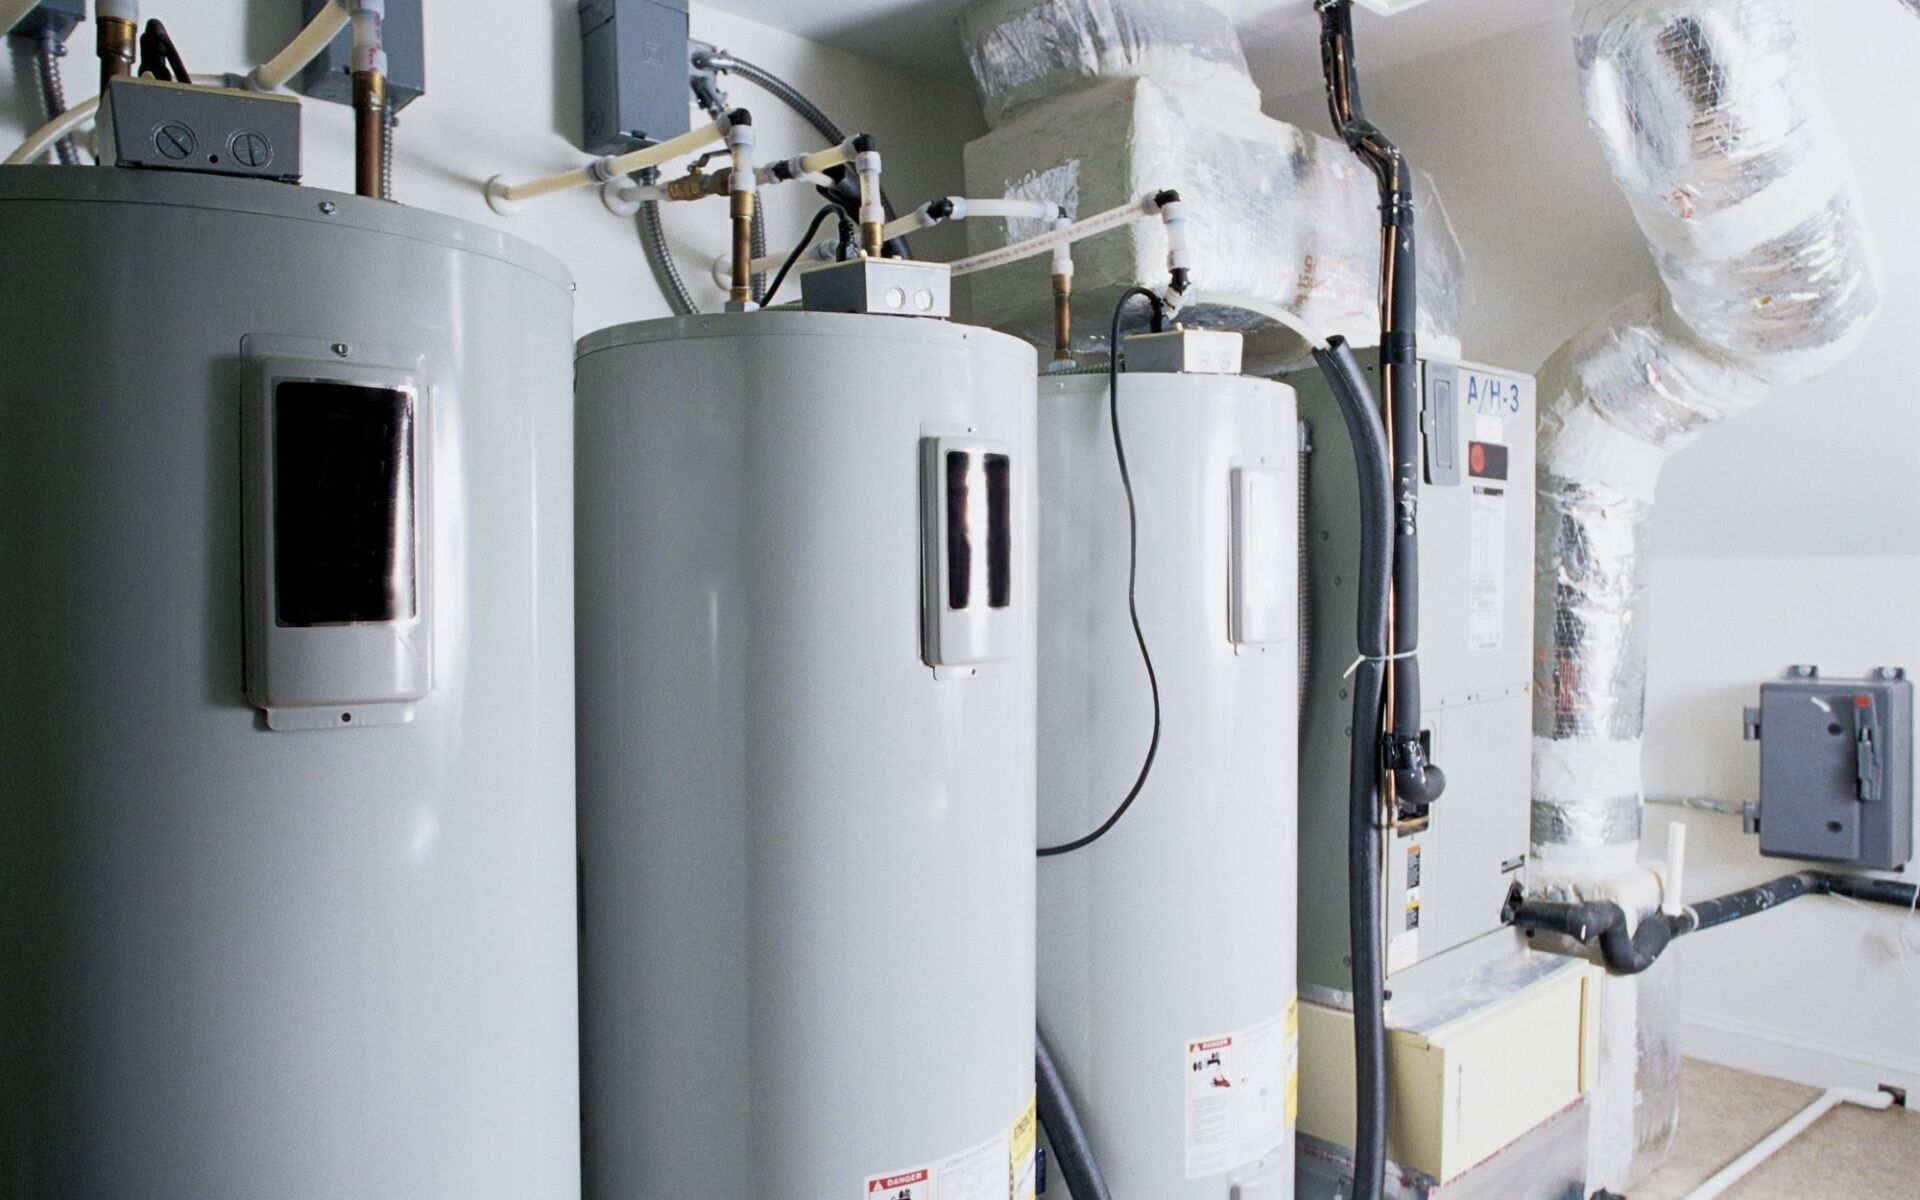 hot water heaters